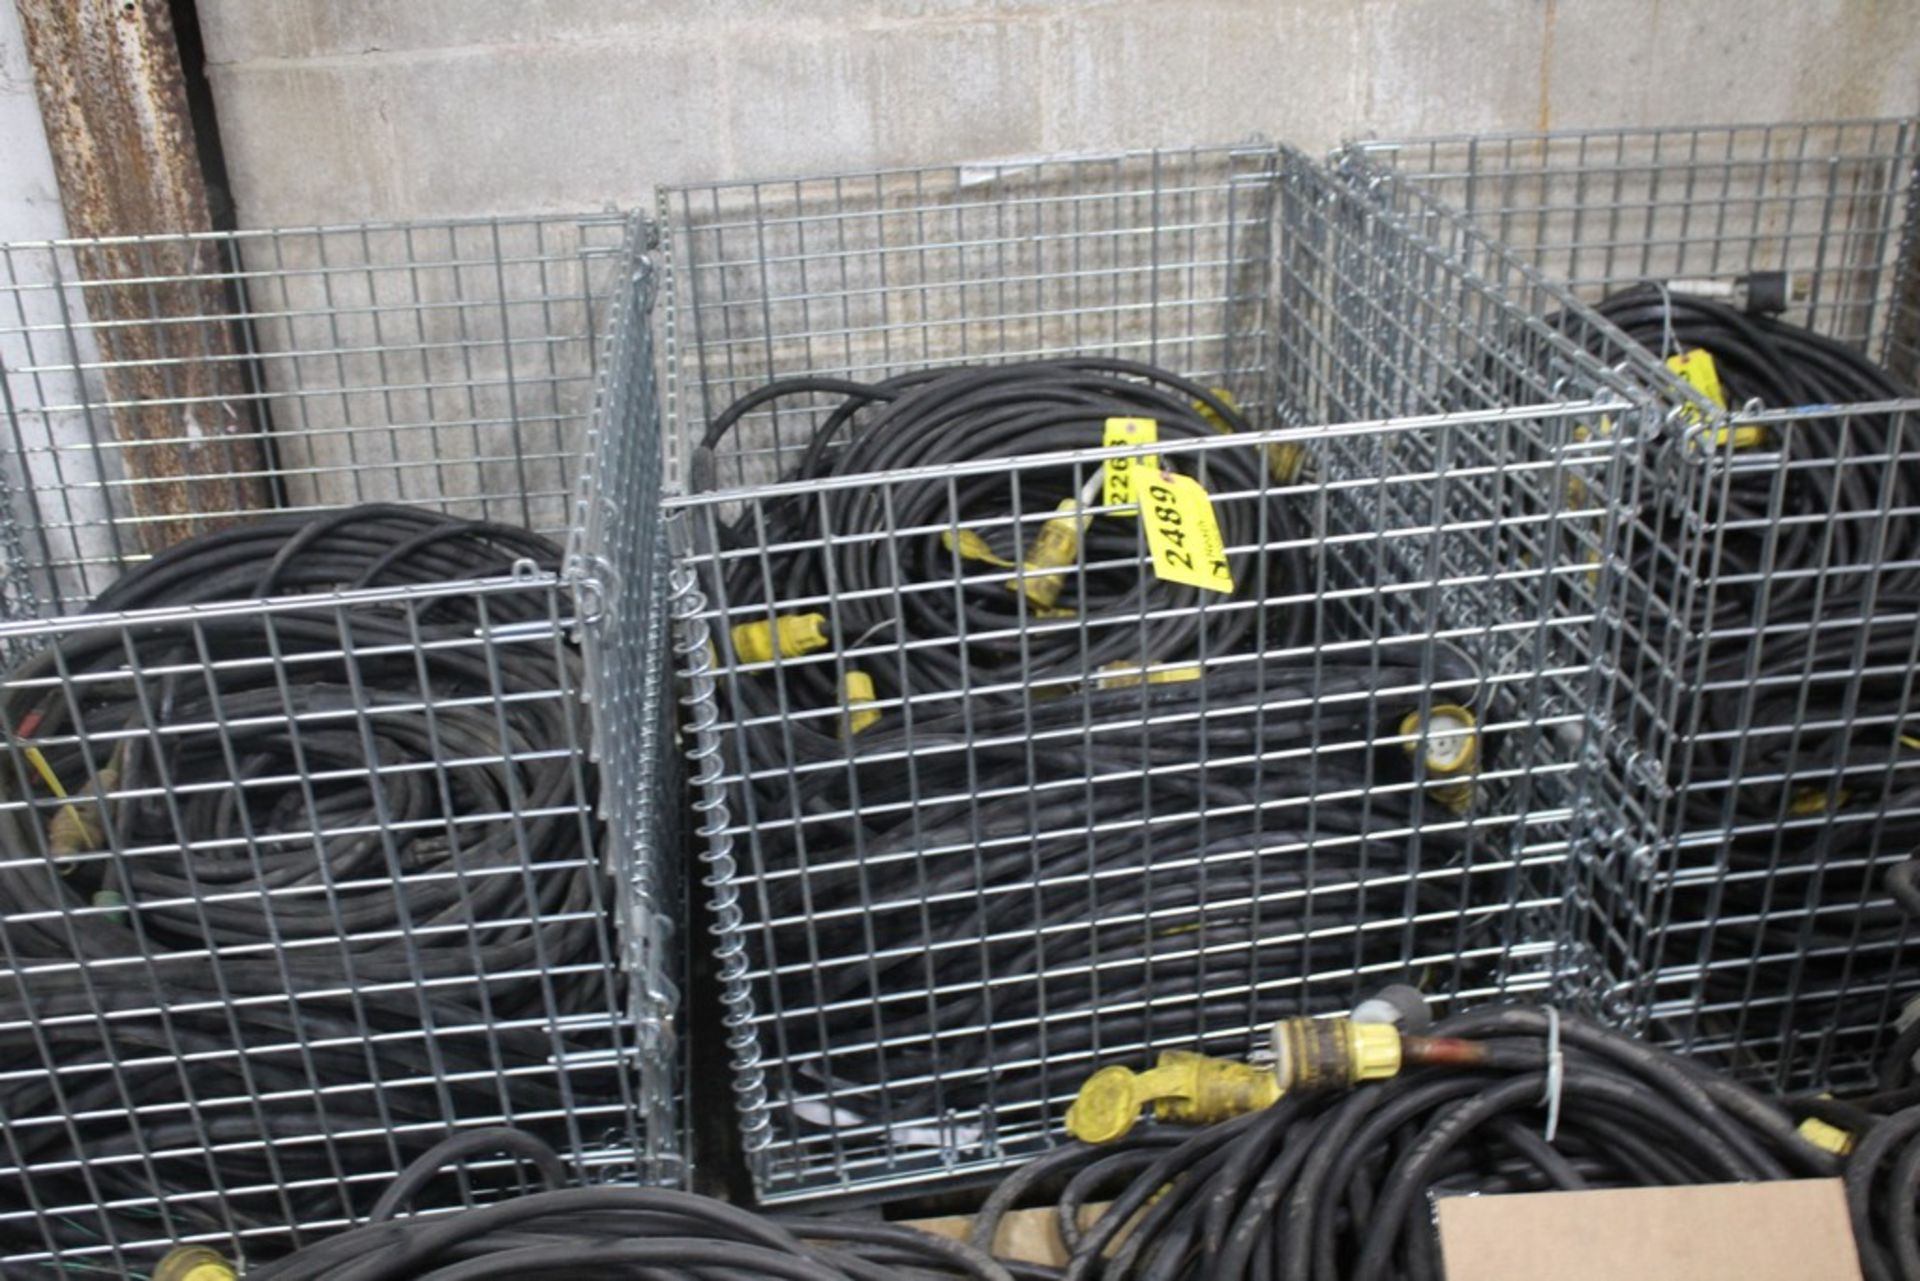 COLLAPSIBLE WIRE CRATE, 32" X 40" X 33"-NO CONTENTS (PICKUP DELAYED UNTIL CONTENTS REMOVED)